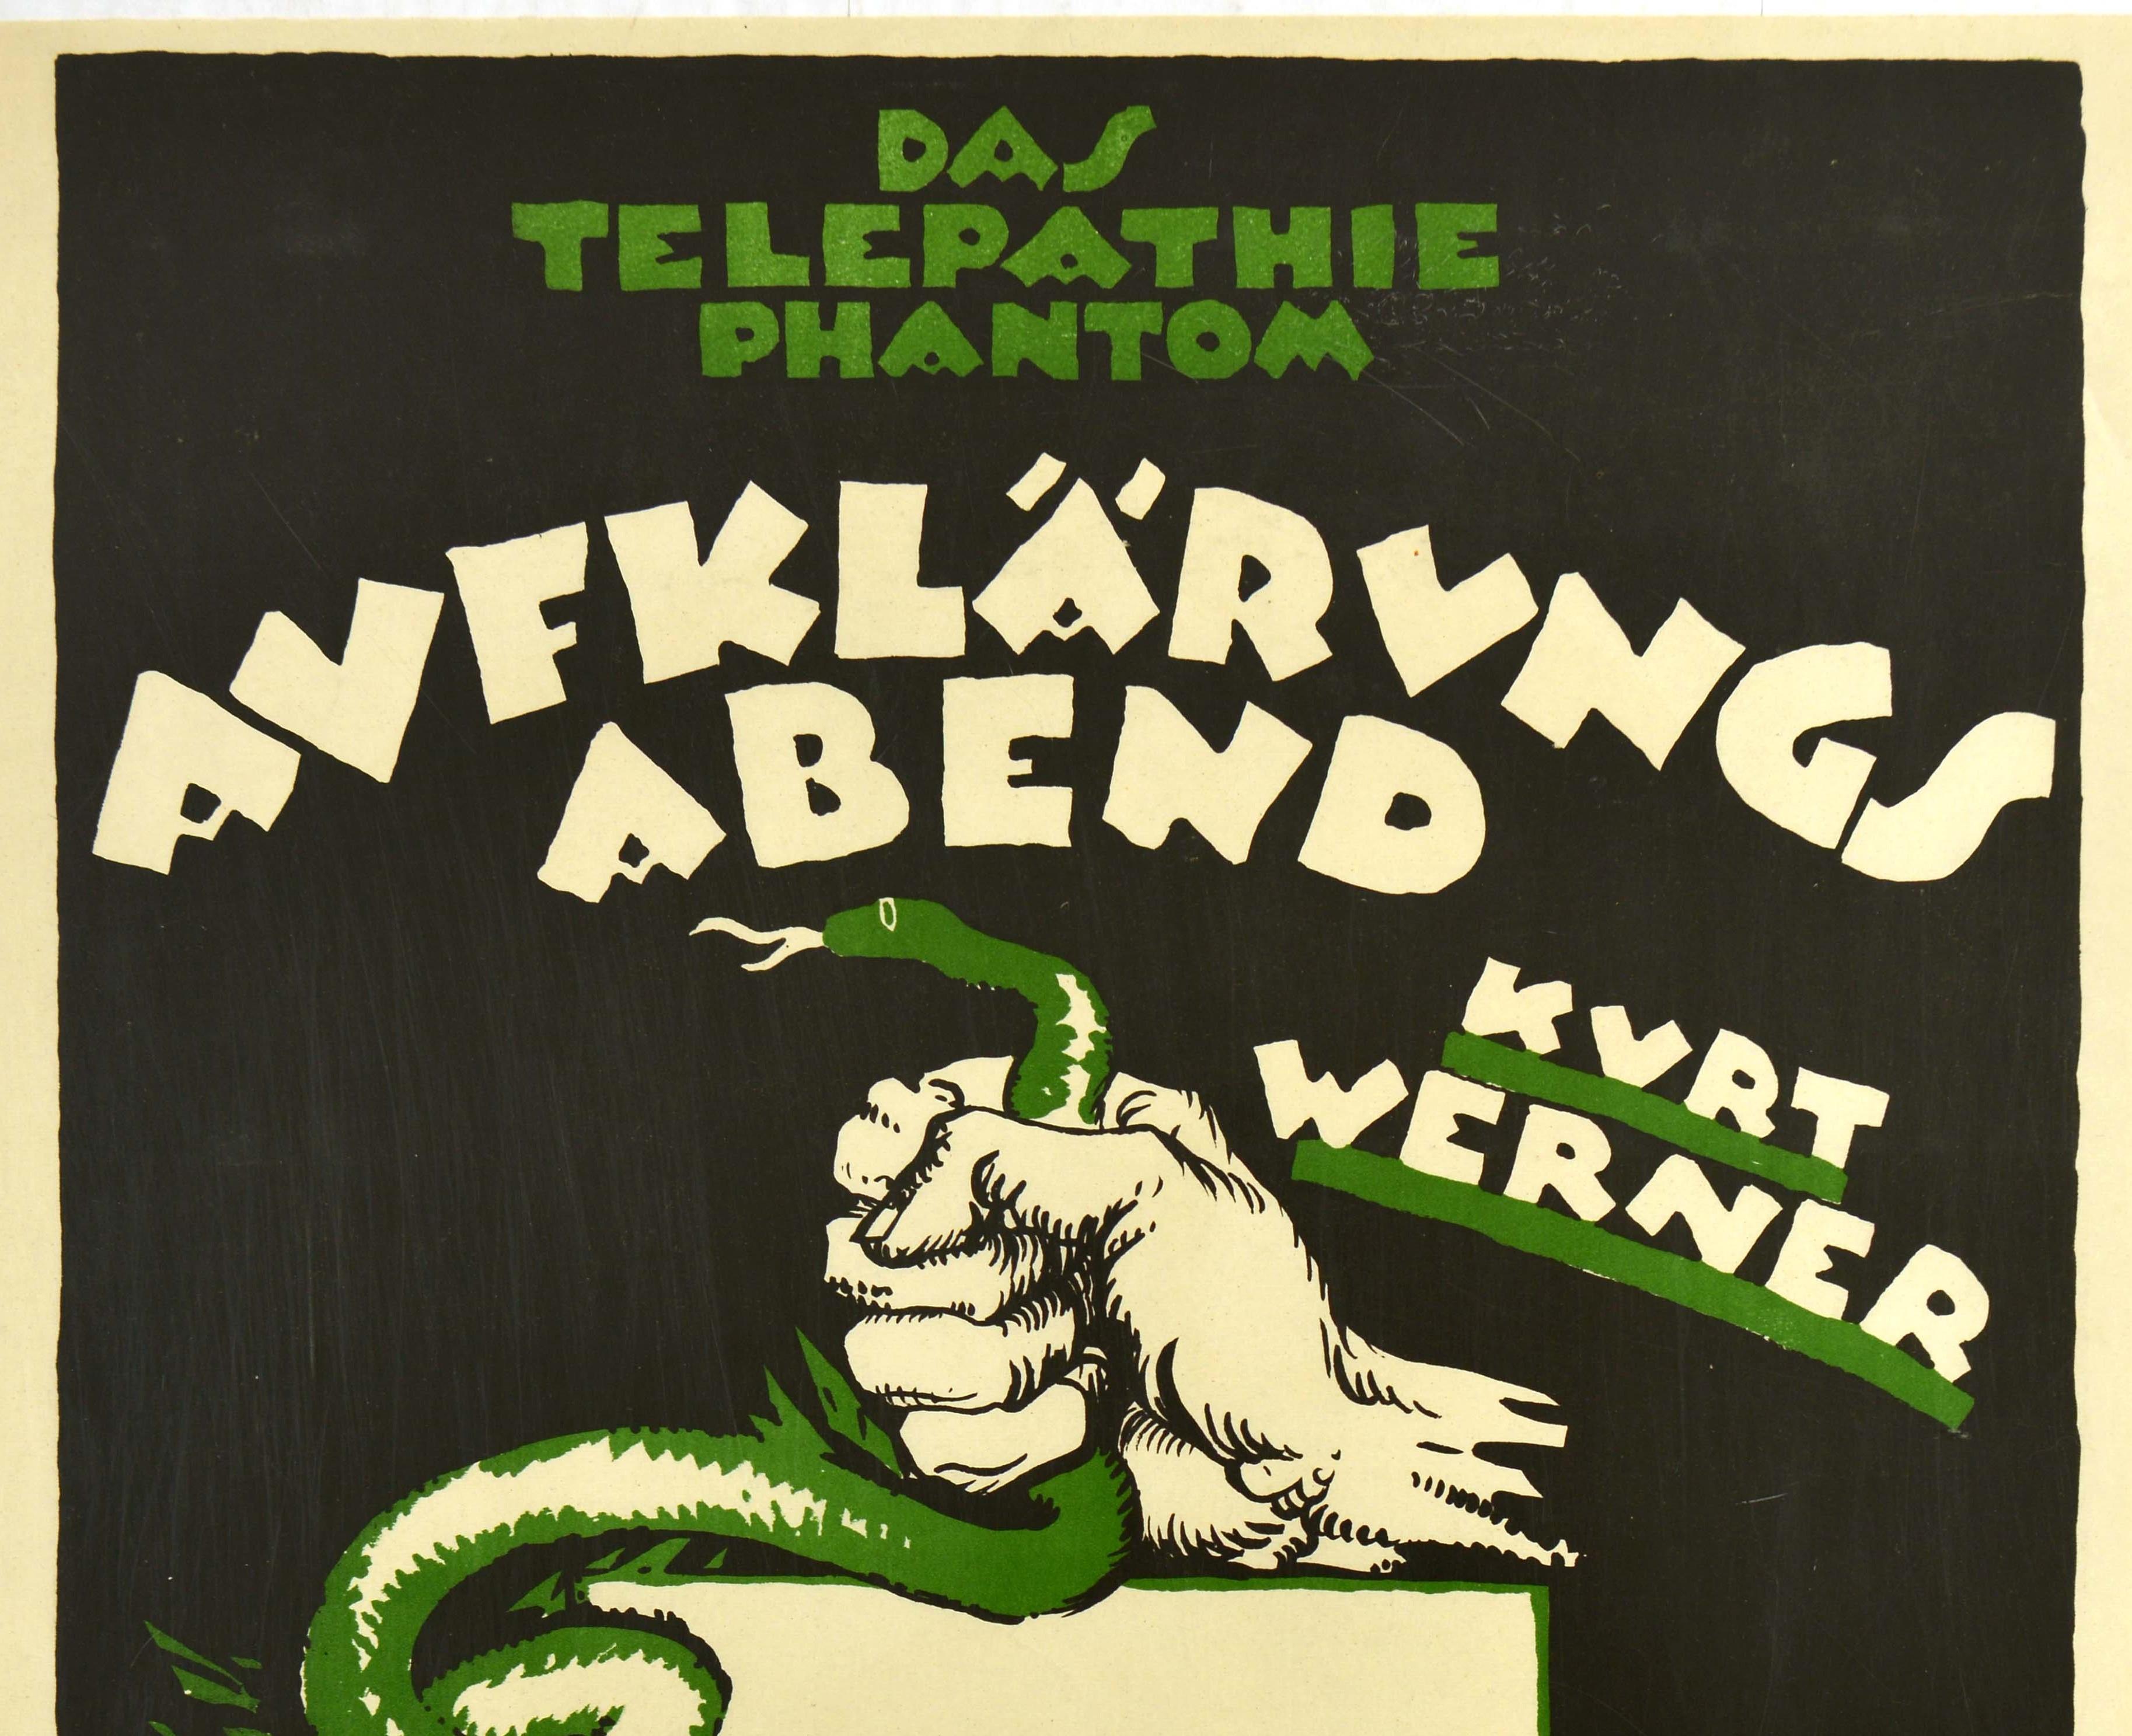 Original vintage poster - Das Telepathie Phantom / The Telepathic Phantom educational evening Kurt Werner for truth and clarity against nonsense and lack of understanding - featuring a dramatic Art Deco design against a black background of a fist